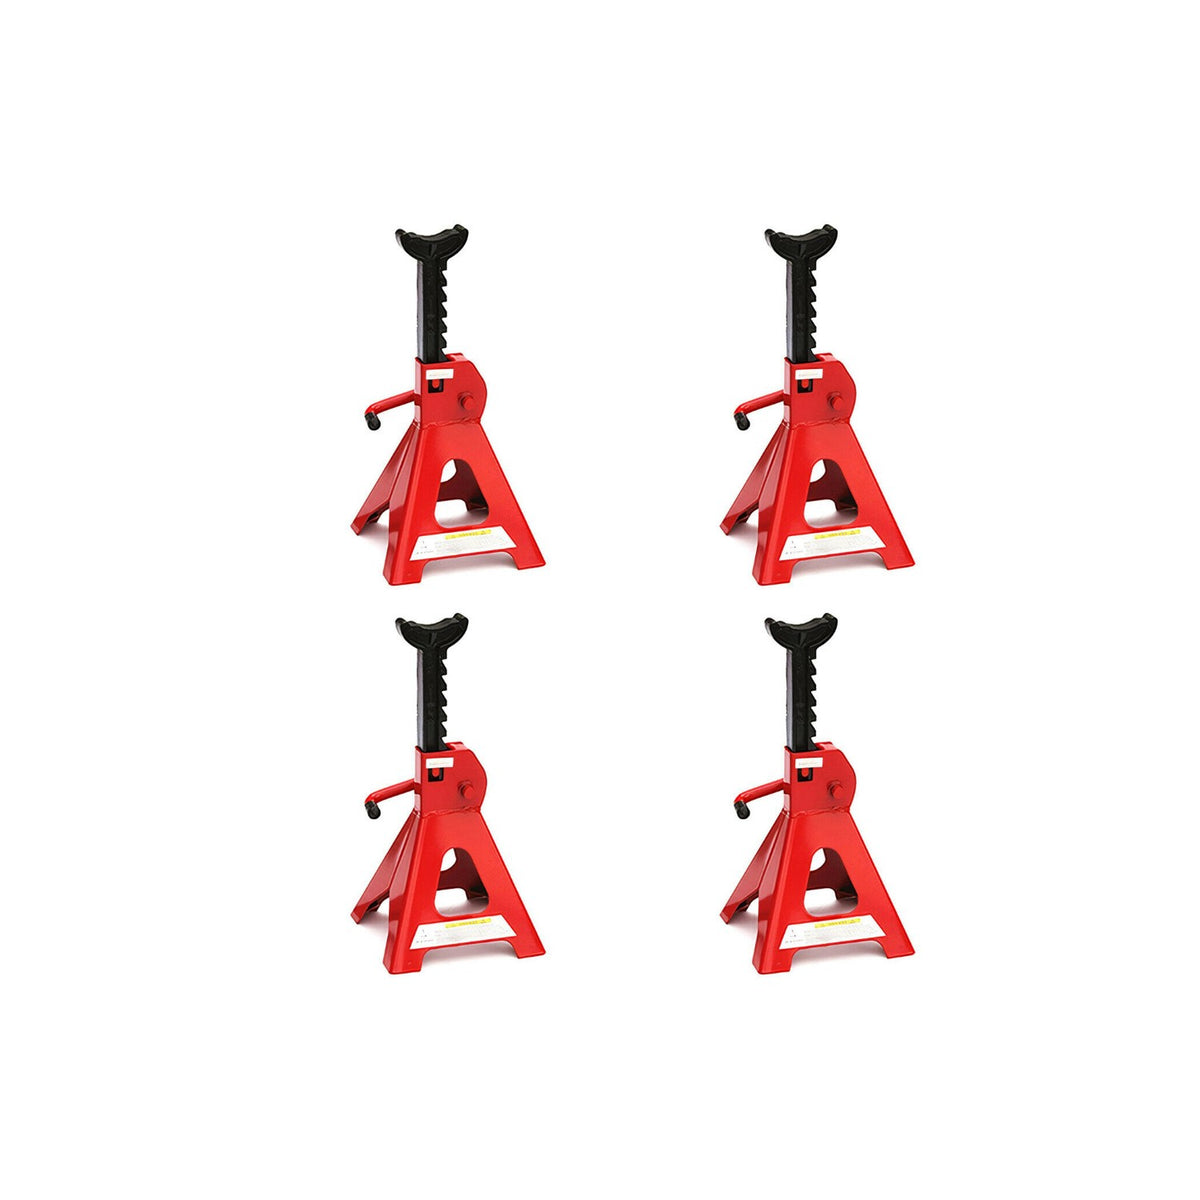 Support stands, parking stands, car jack per support stand, 3 ton, car, truck, 4 pieces